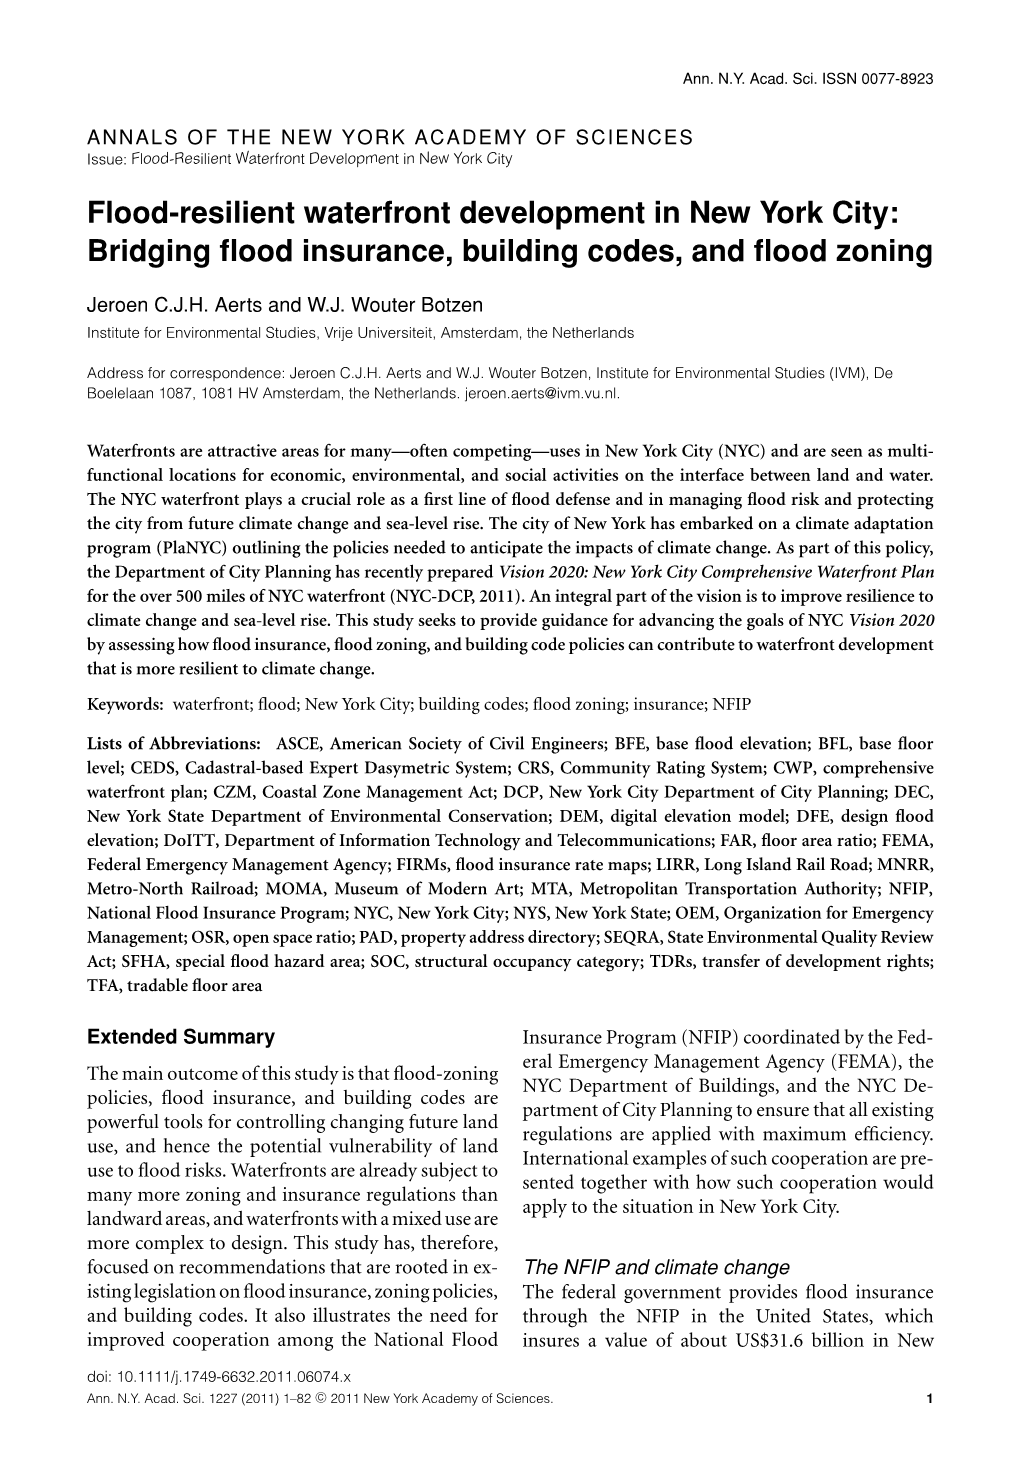 Bridging Flood Insurance, Building Codes, and Flood Zoning